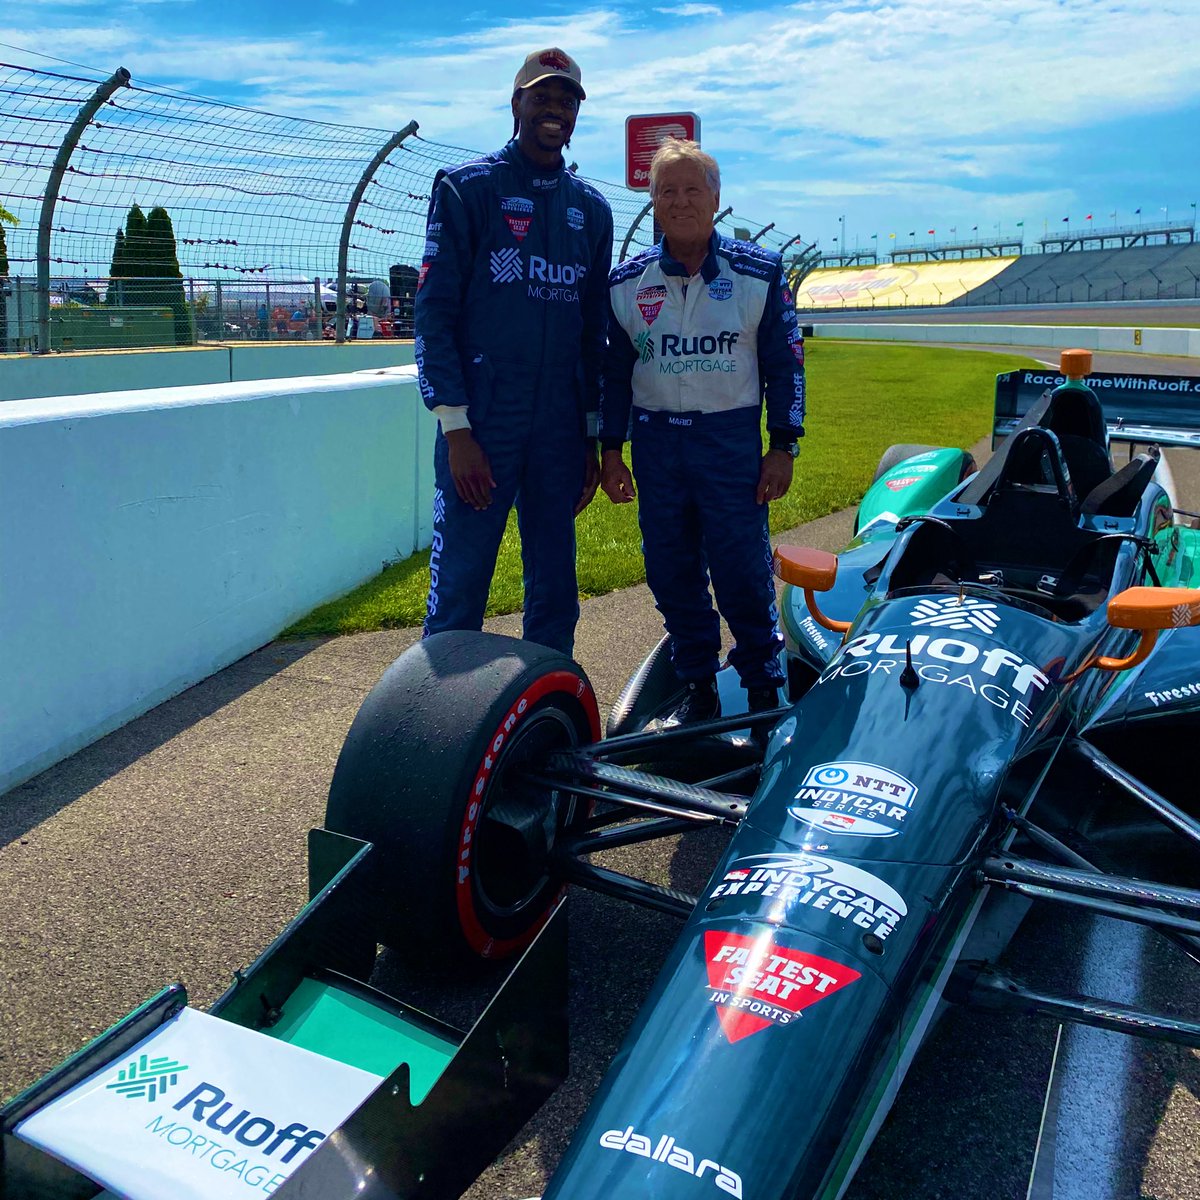 Before he paces the field on Sunday for the #Verizon200, @JustHolla7 got some pointers from a racing legend today. @MarioAndretti gave the @Pacers forward a ride in an @IndyCar 2-seater to get him ready for Sunday. #TheBrickyard | #NASCAR